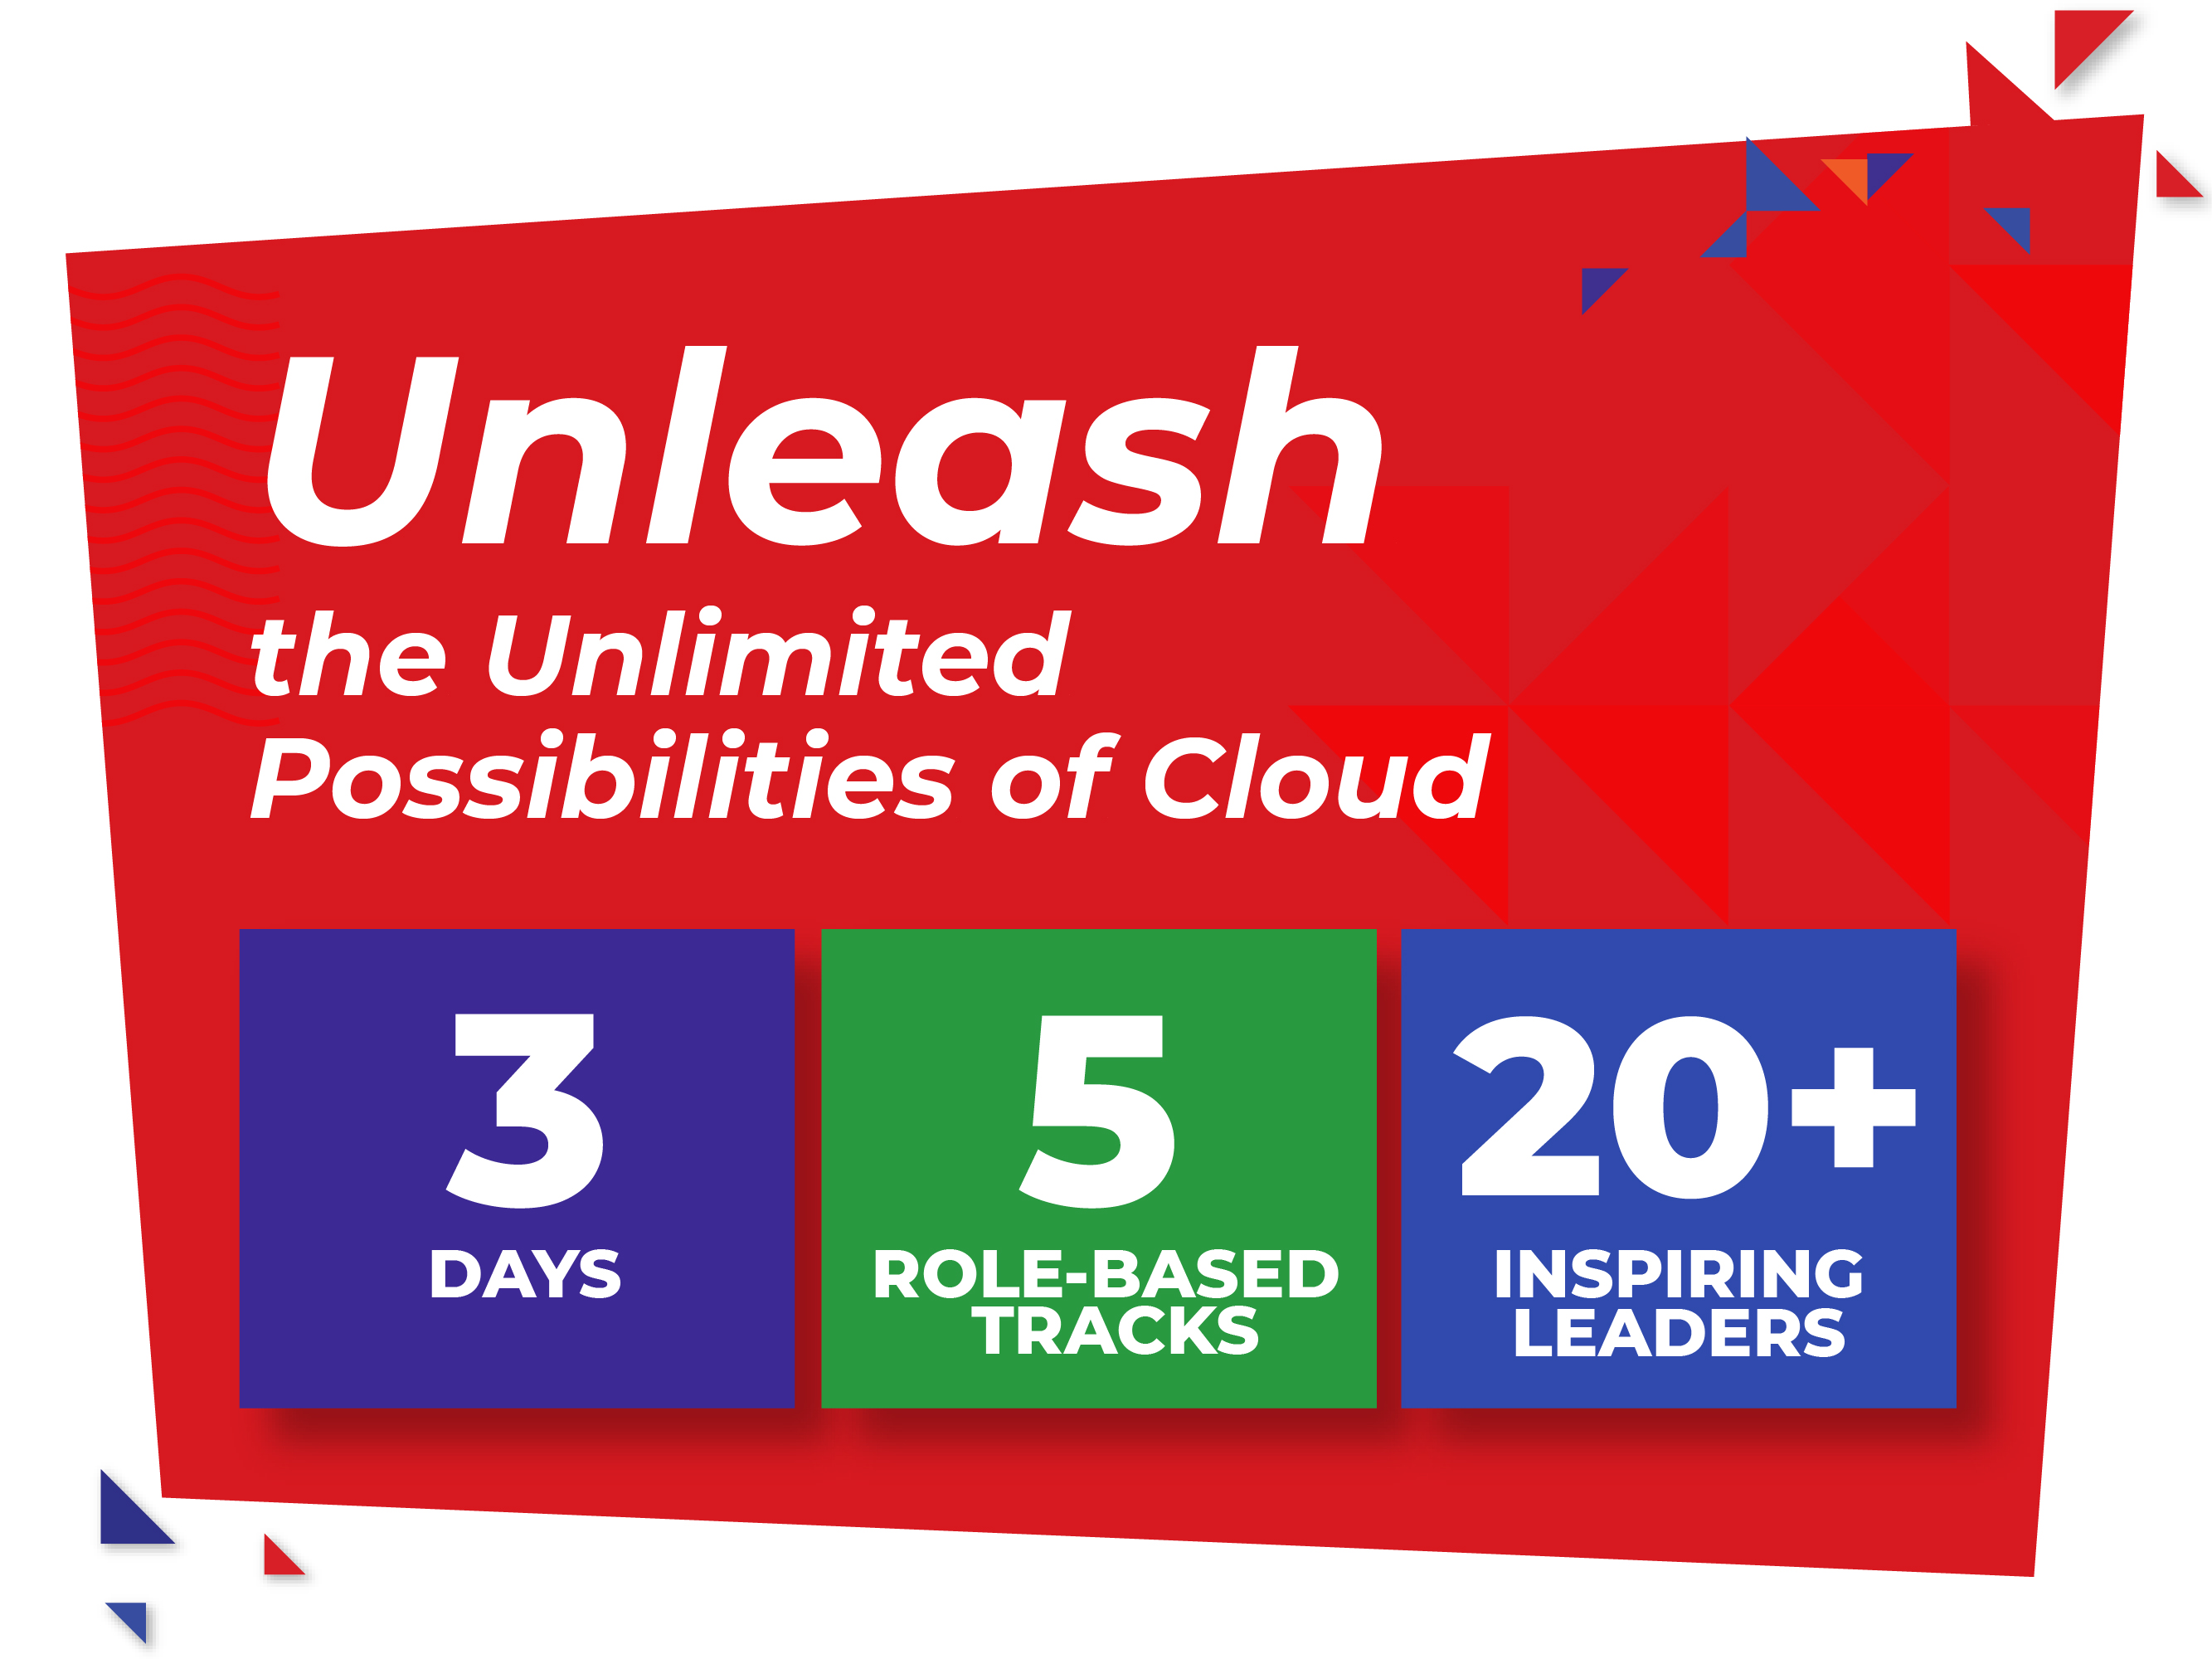 Unleash the unlimited possibilities of cloud